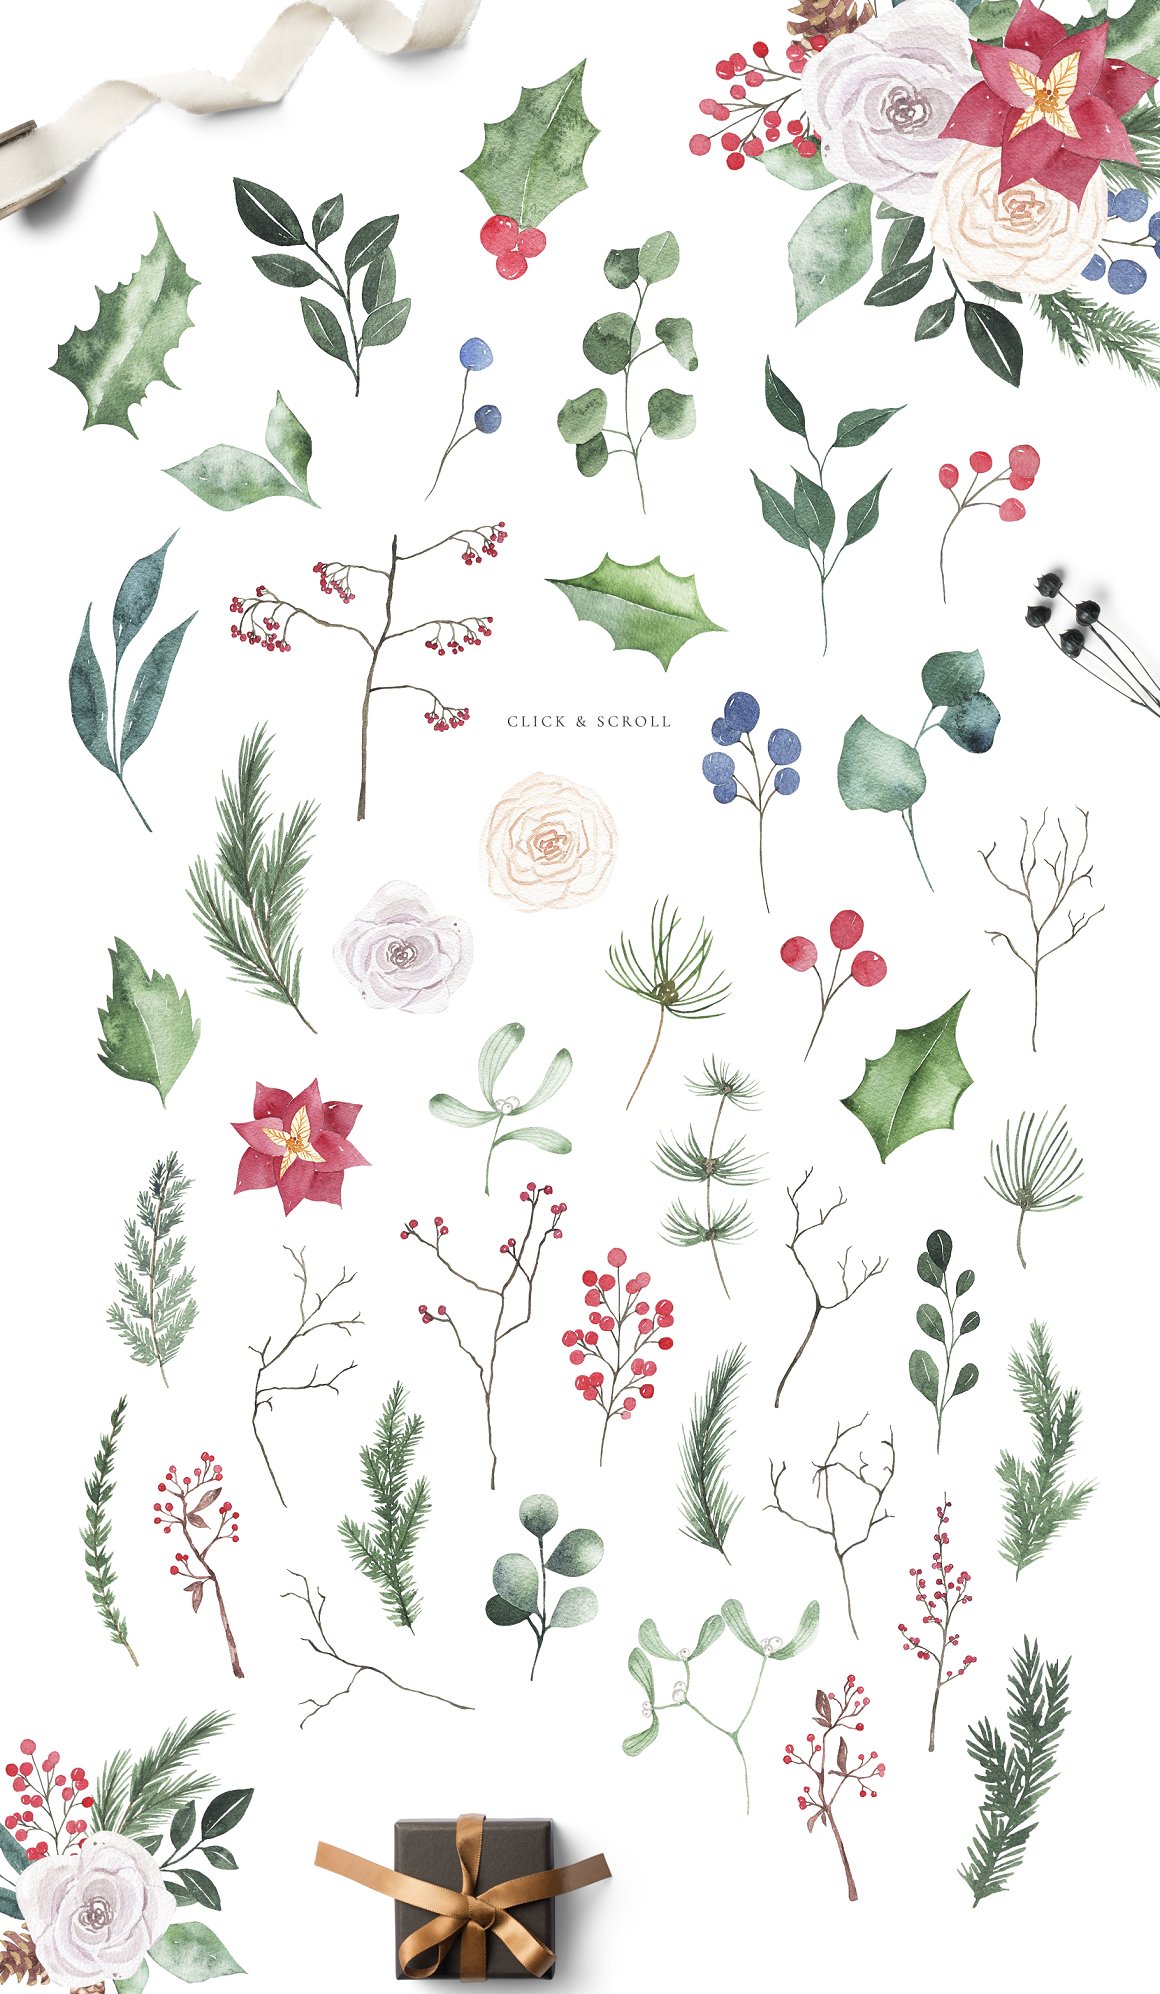 Collection of different floral elements on a white background.